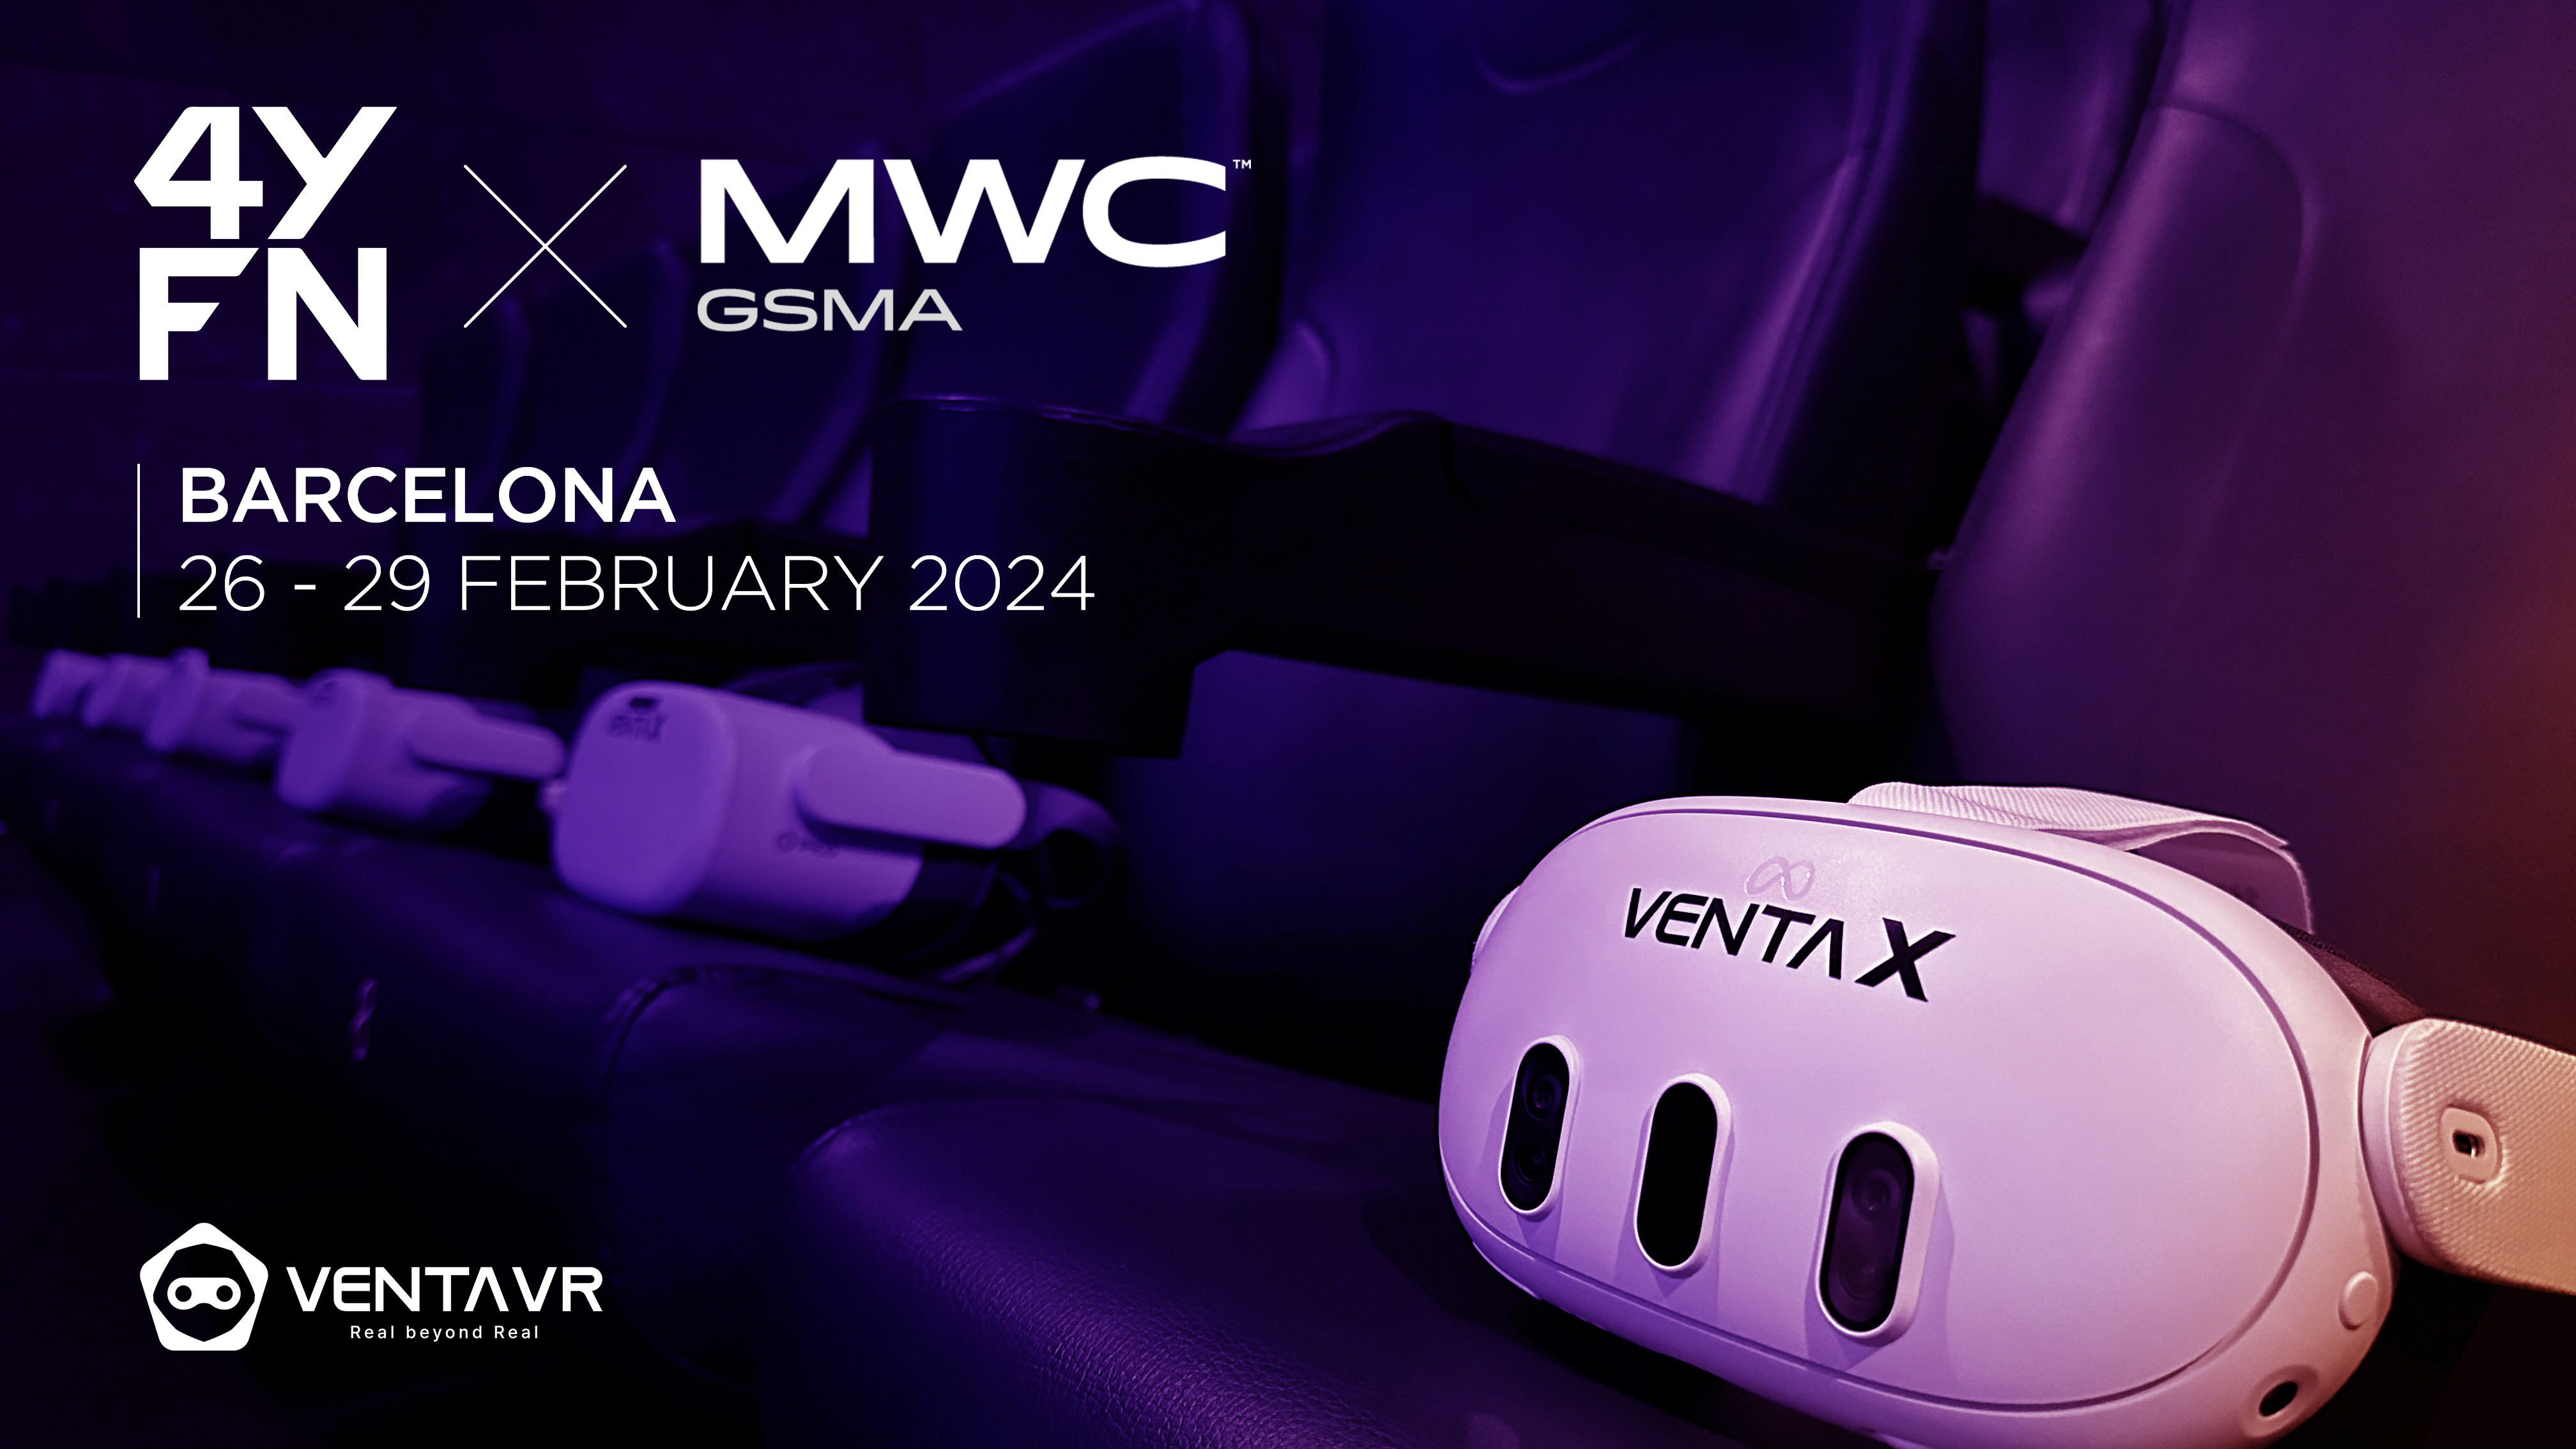 [Asiatoday] VENTA VR Co., Ltd. participates in MWC2024 (4YFN)...Aiming for global expansion.